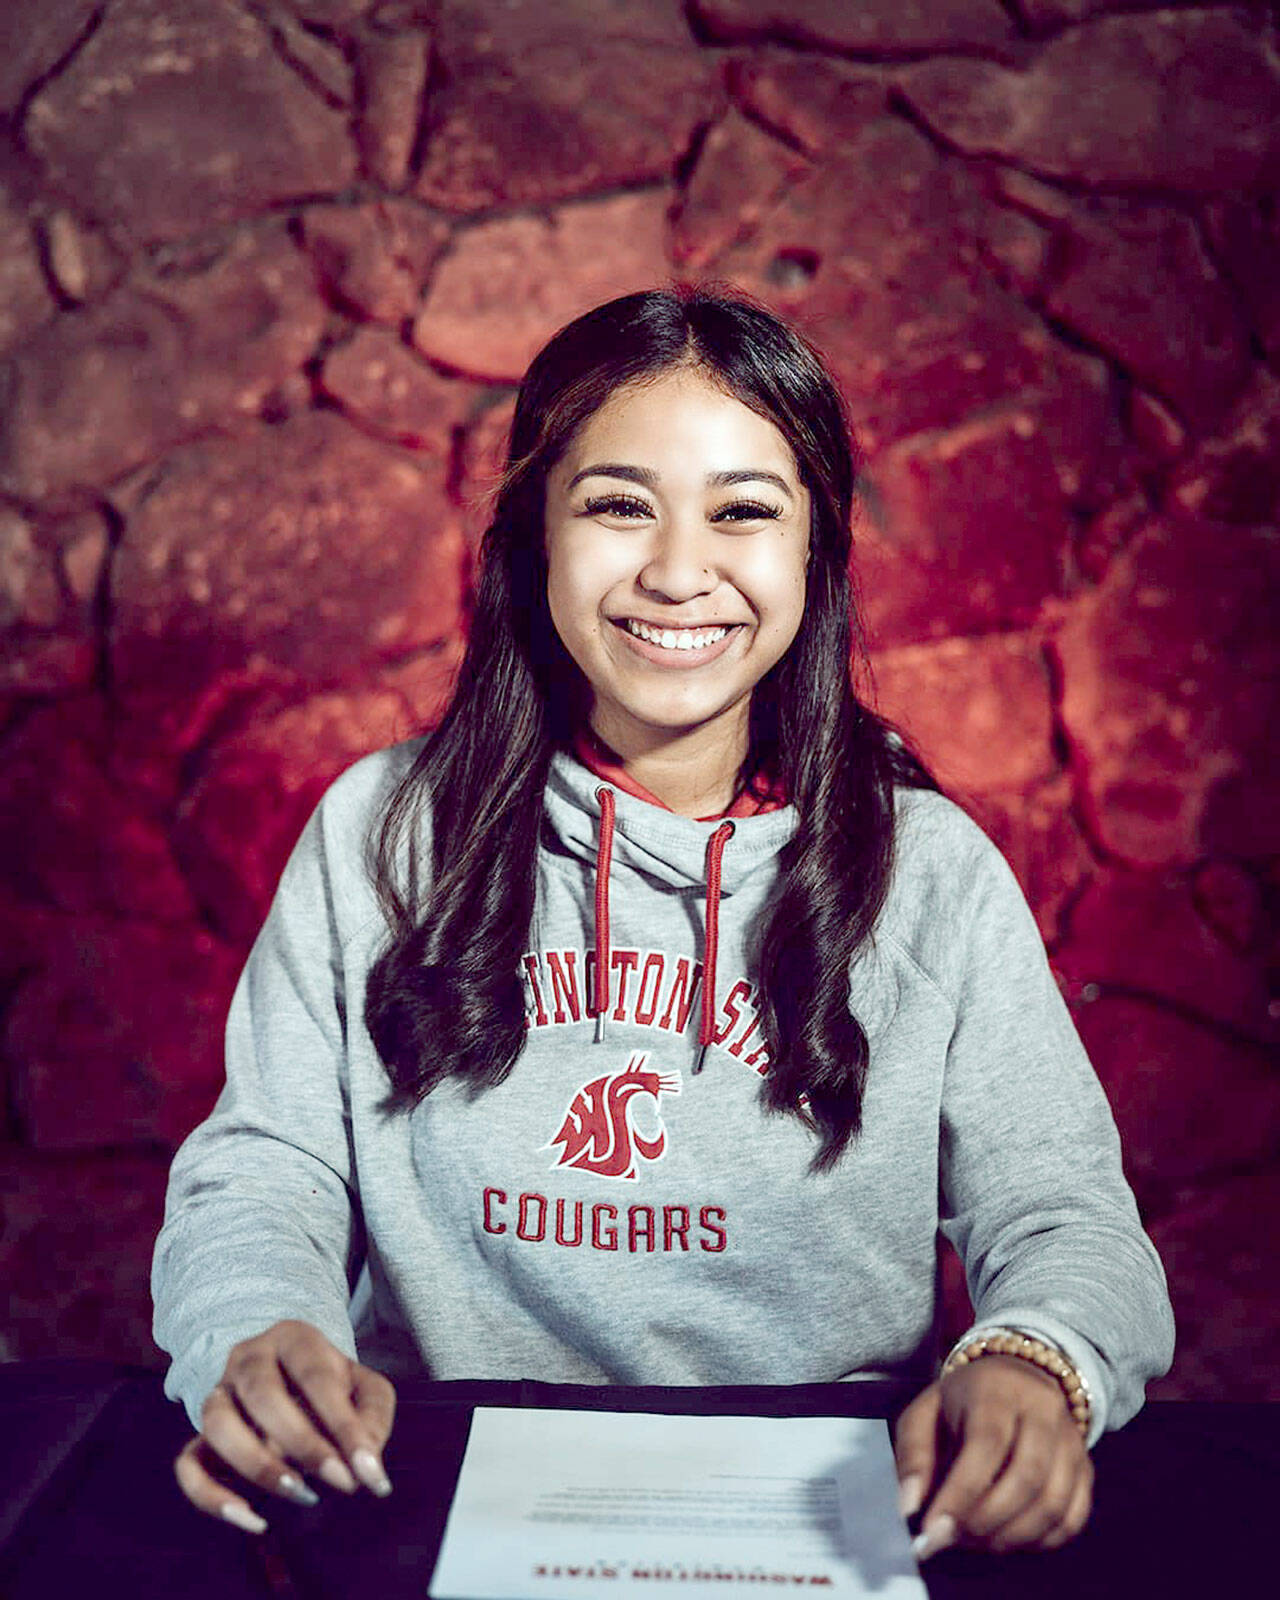 Peninsula College goalkeeper Musuai Isaia has signed a letter of intent to continue her soccer career at Washington State University.